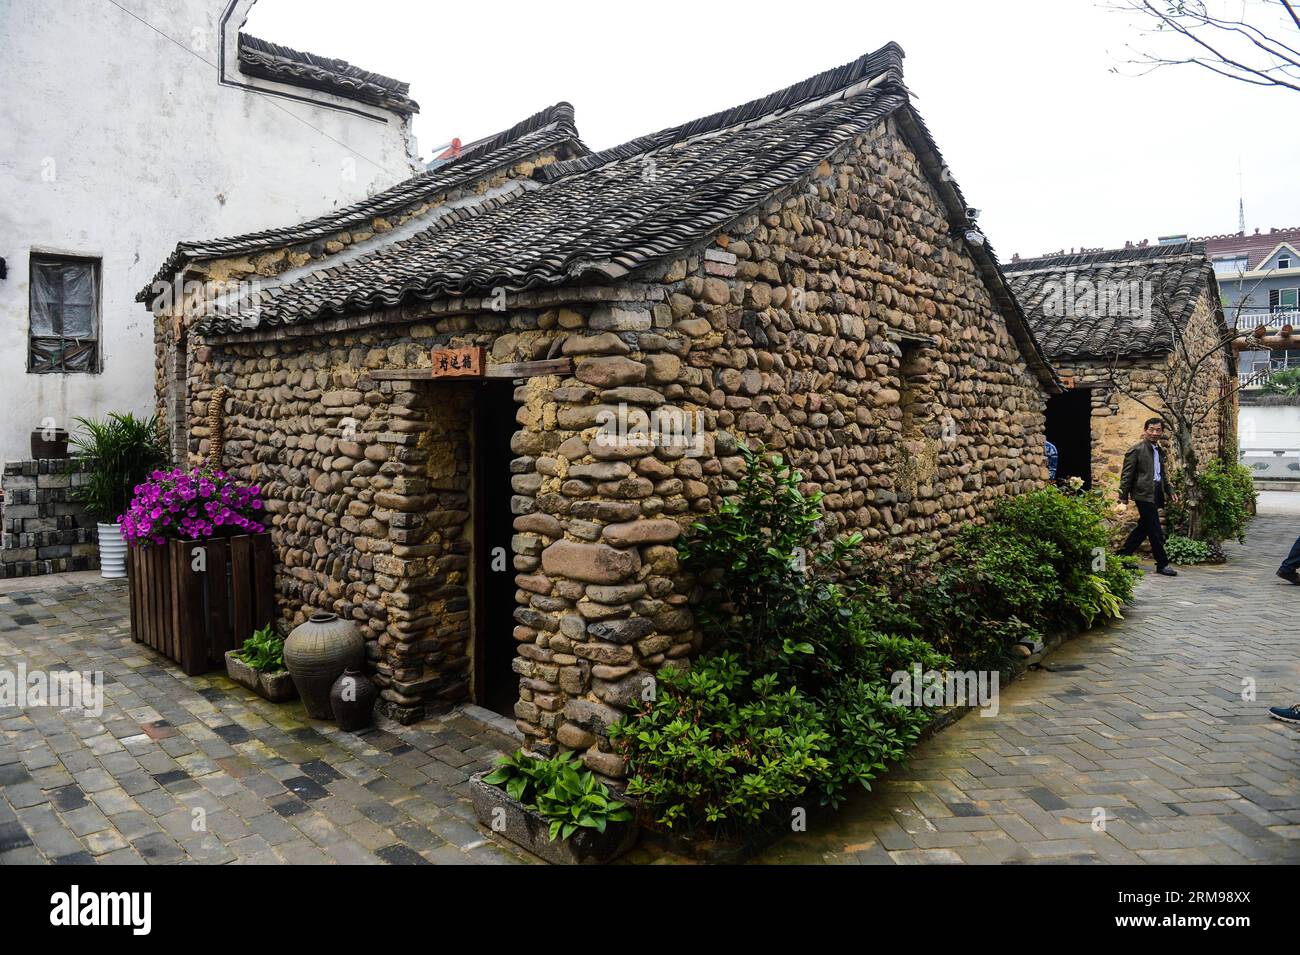 (140513) -- TONGLU, May 13, 2014 (Xinhua) -- Photo taken on May 13, 2014 shows the swinery tea bar in Dipu Village of Jiangnan Town in Tonglu County, east China s Zhejiang Province. Dipu Village, a national historical and cultural village with nearly a thousand years history, has committed to environment reform, village protection and tourism development for the past few years. The swinery tea bar sets a successful example of the transform. The bar used to be five messy stone houses for pigs keeping. After renovation, it functions as a modern tea bar with traditional appearance, attracting man Stock Photo